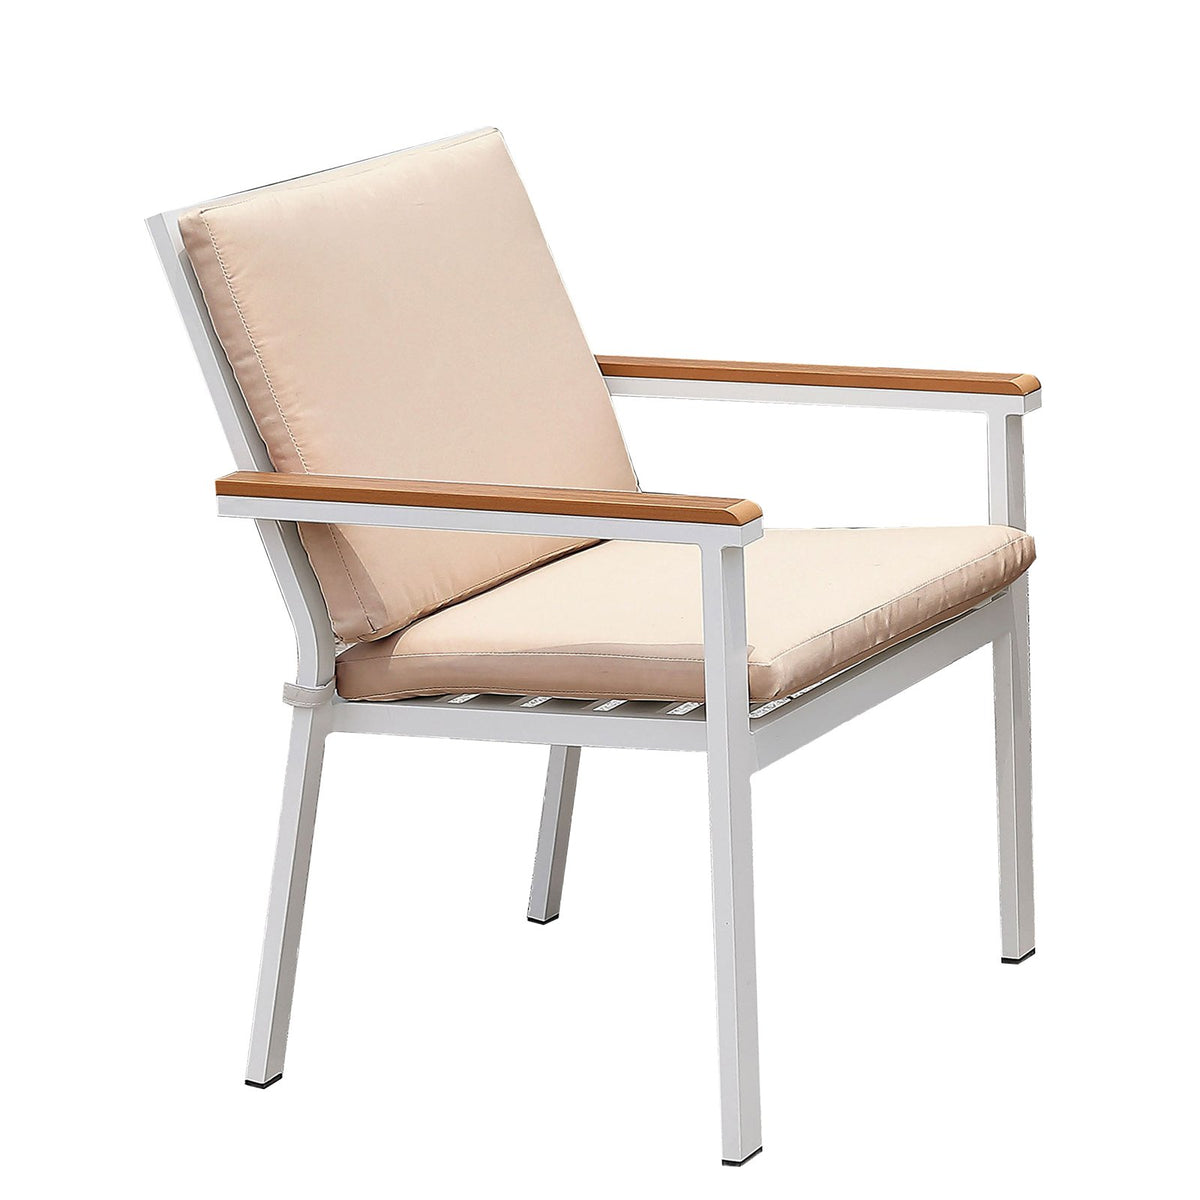 27 Inch Aluminum Frame Arm Chair, Outdoor, Cushions, Set of 2, White, Pink - BM206271